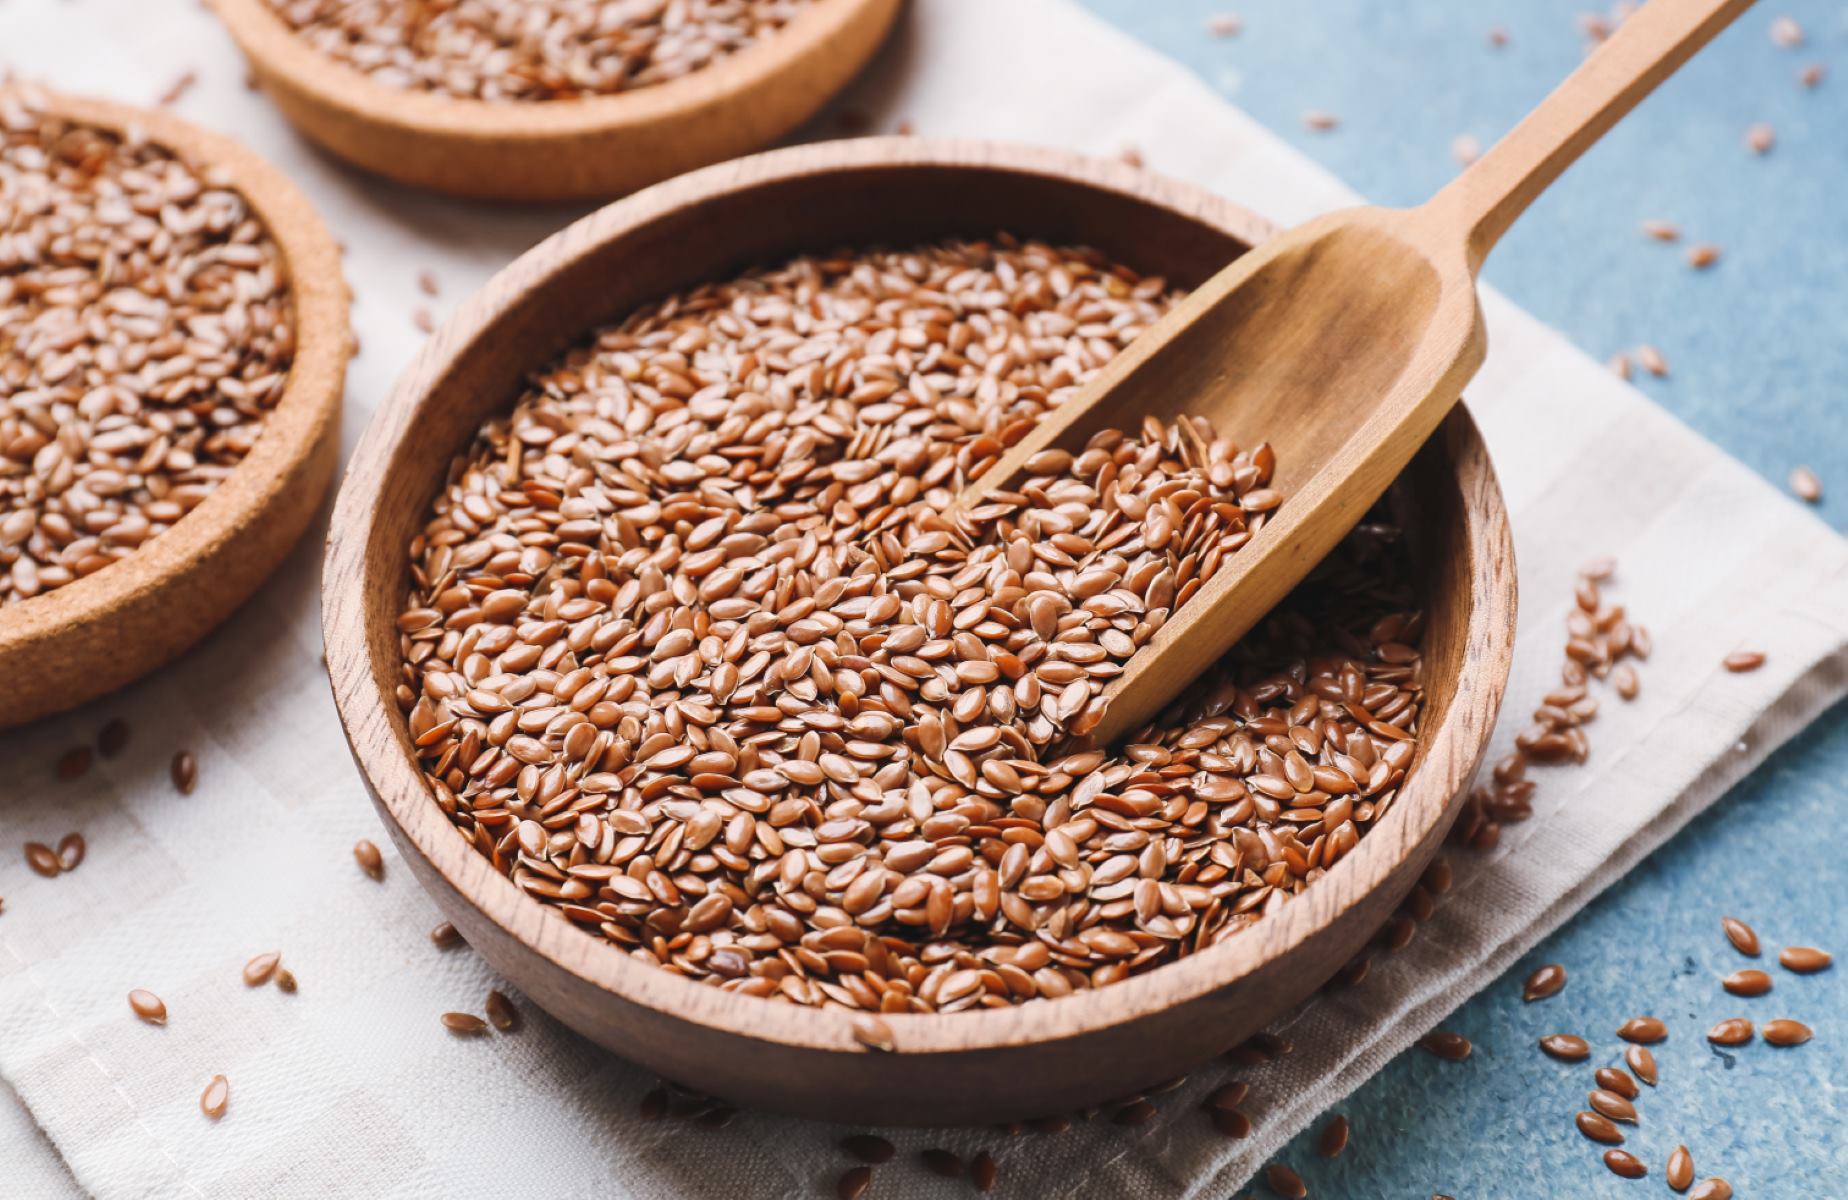 How To Consume Flax Seeds